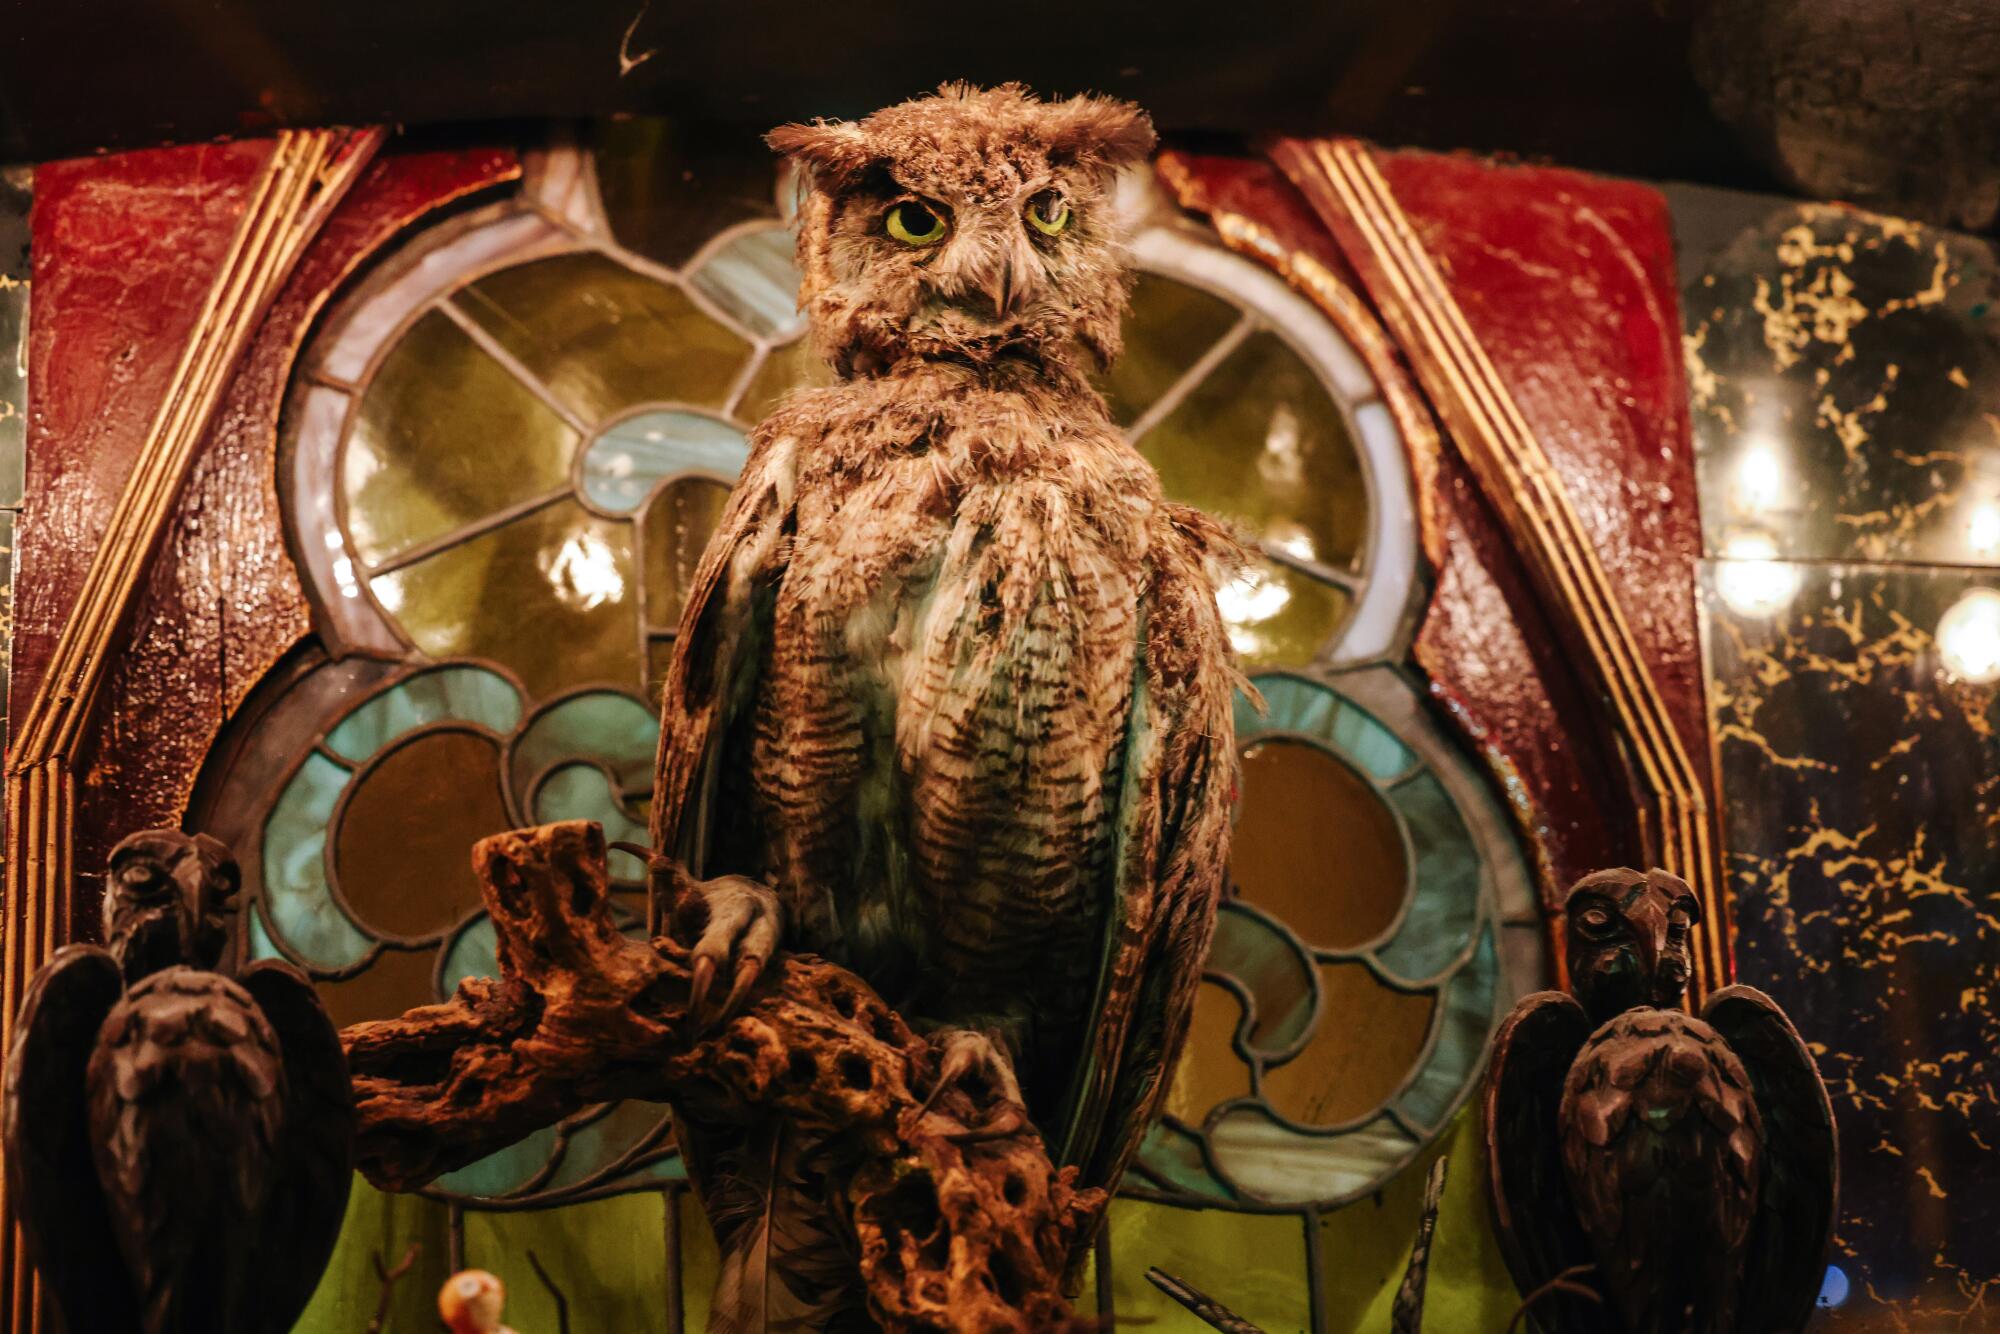 A stuffed owl in front of a stained glass window.